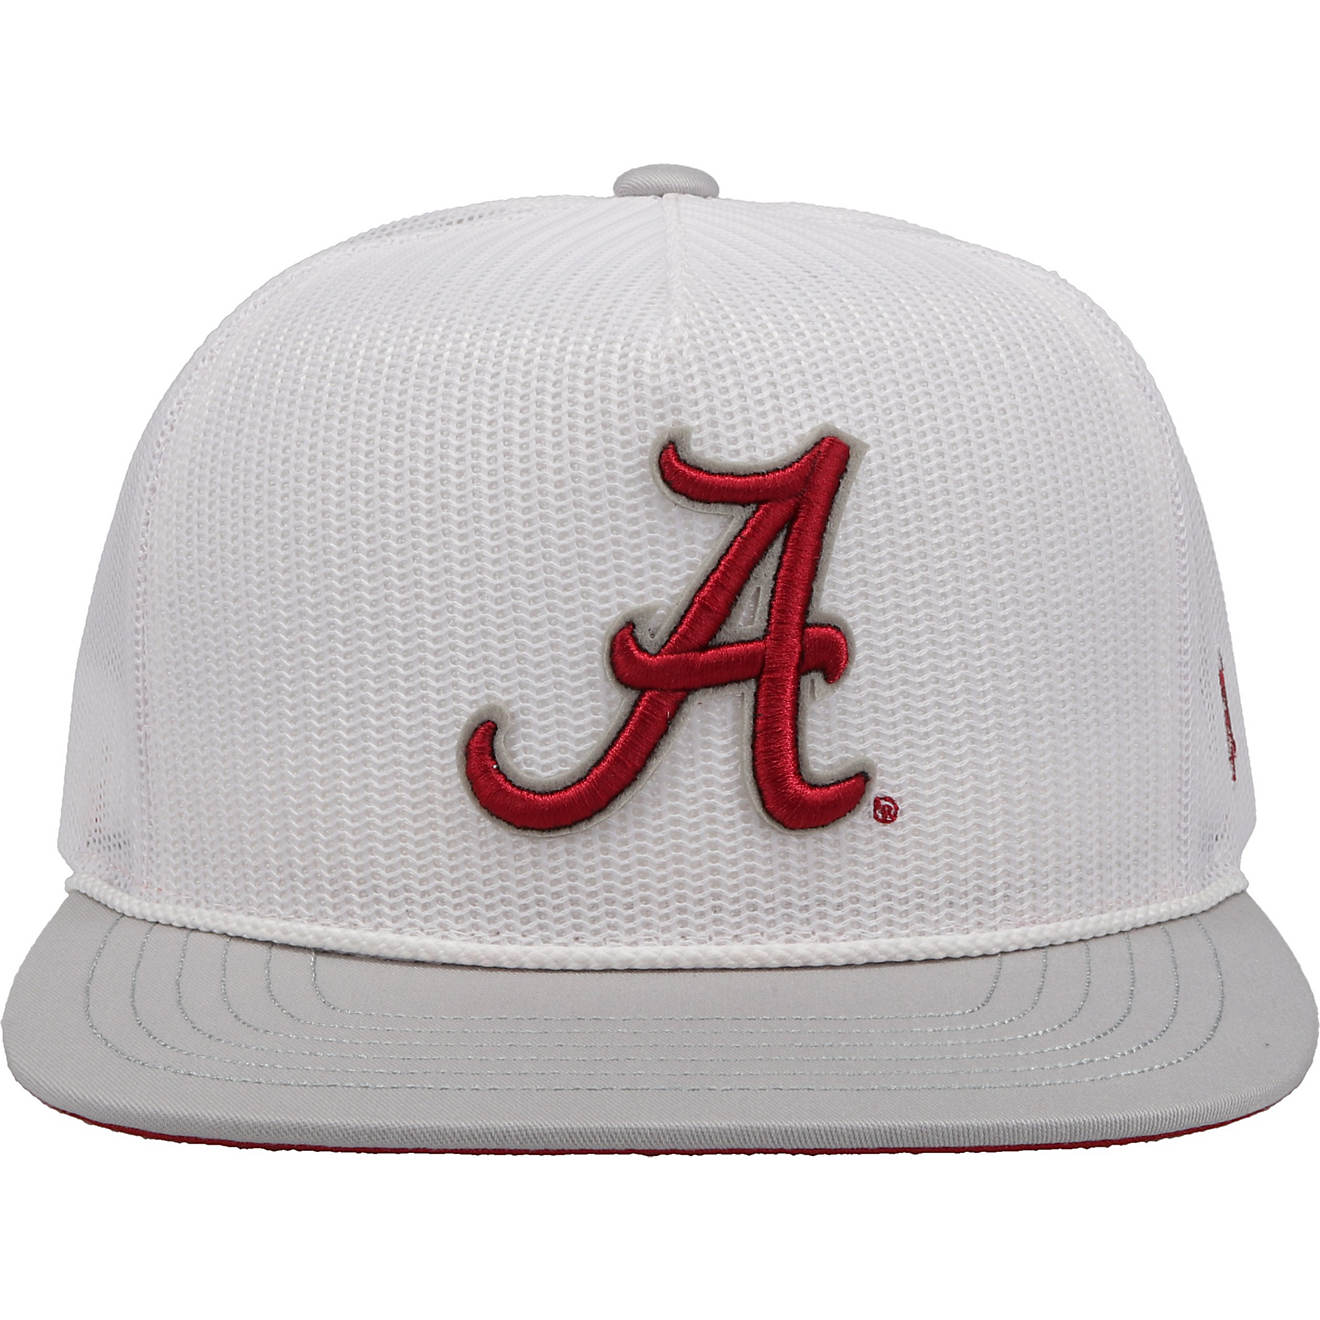 Hooey Adults' University of Alabama All American Hat                                                                             - view number 1